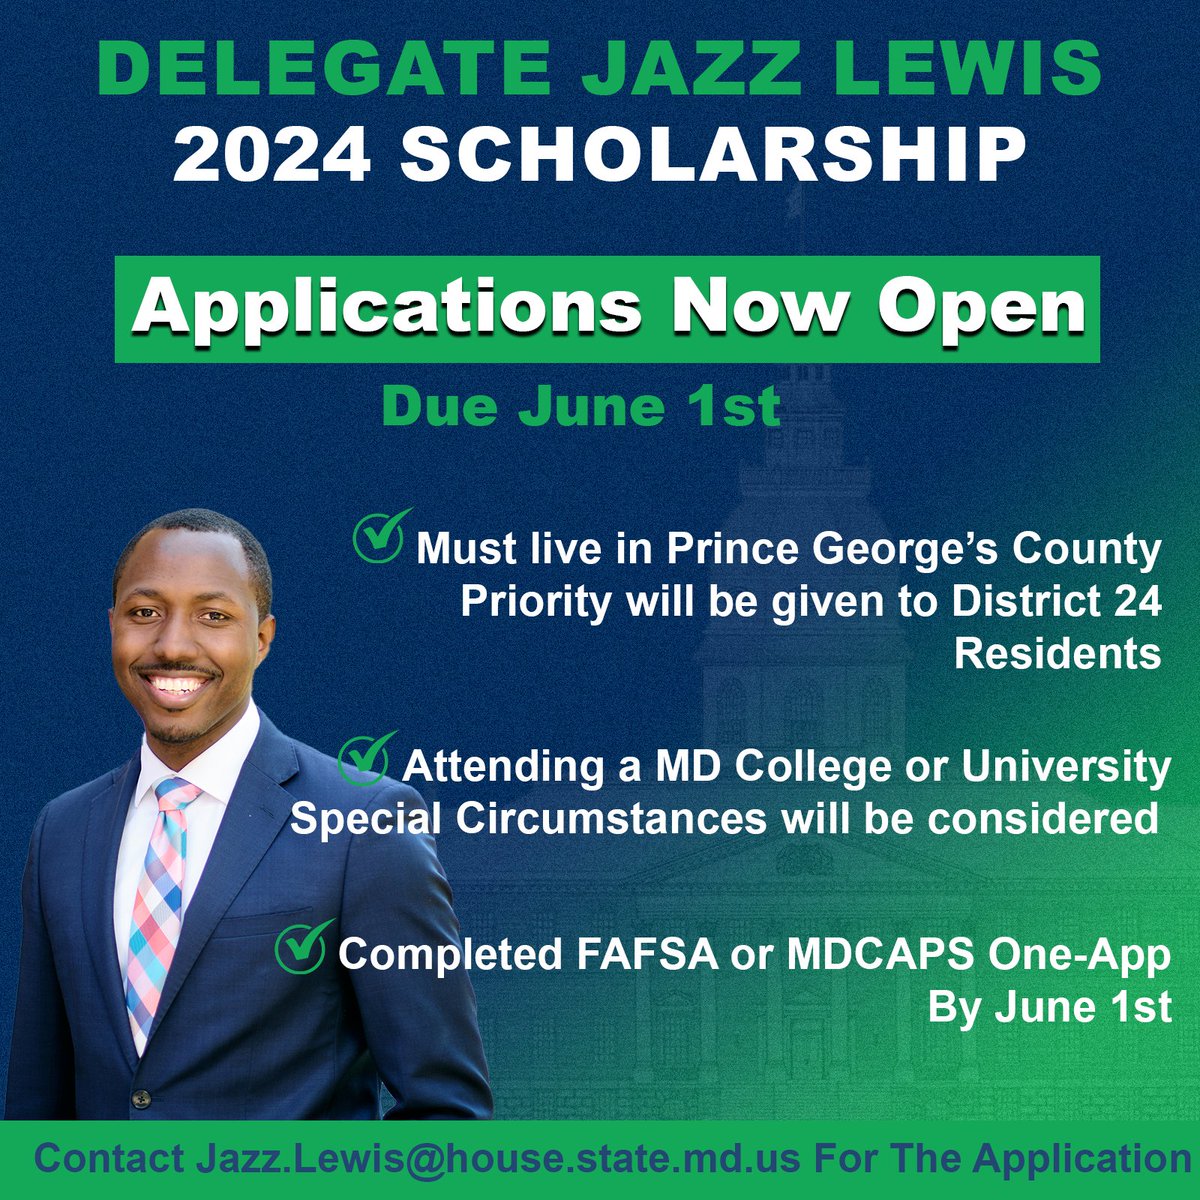 Every year, I am able to award some amazing students scholarship money to pursue their higher education. I am always thrilled to help some great Prince Georgians in pursuit of their schooling. Email my office or find the application at JazzLewis.com